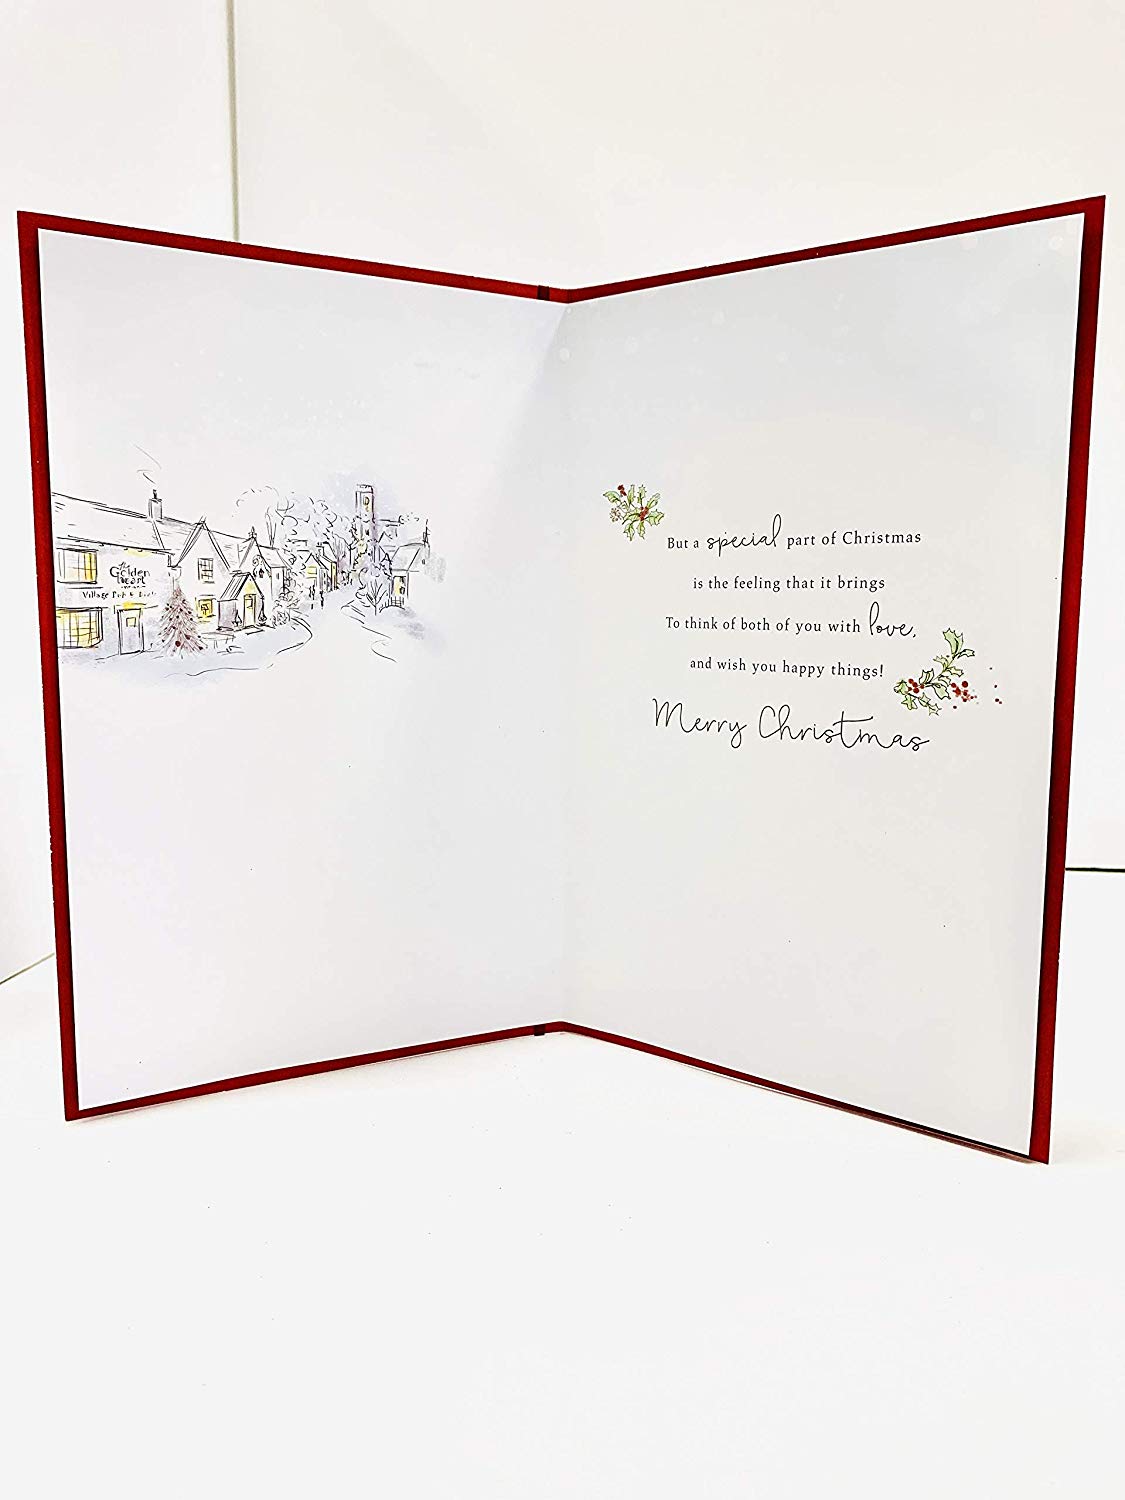 Son and Daughter-in-Law Christmas Card Lovely Verse 